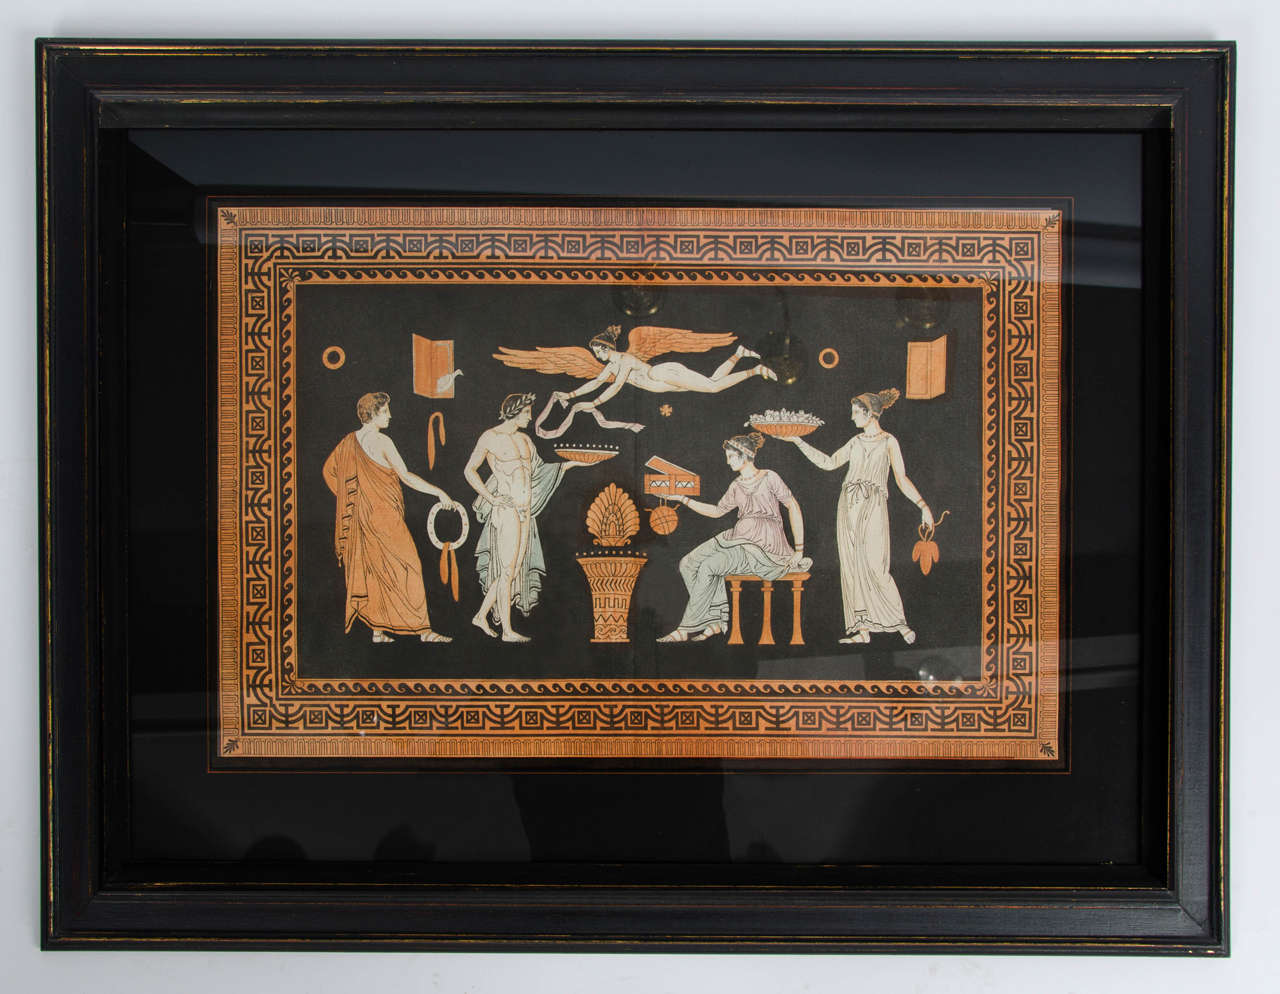 These illustrations are by Pierre Francois Hugues, Baron D'Huncarville, author to Sir William Hamilton. They depict scenes that appear on Etruscan vases from the Cabinet of Sir William Hamilton now in the British Museum, one of the most important